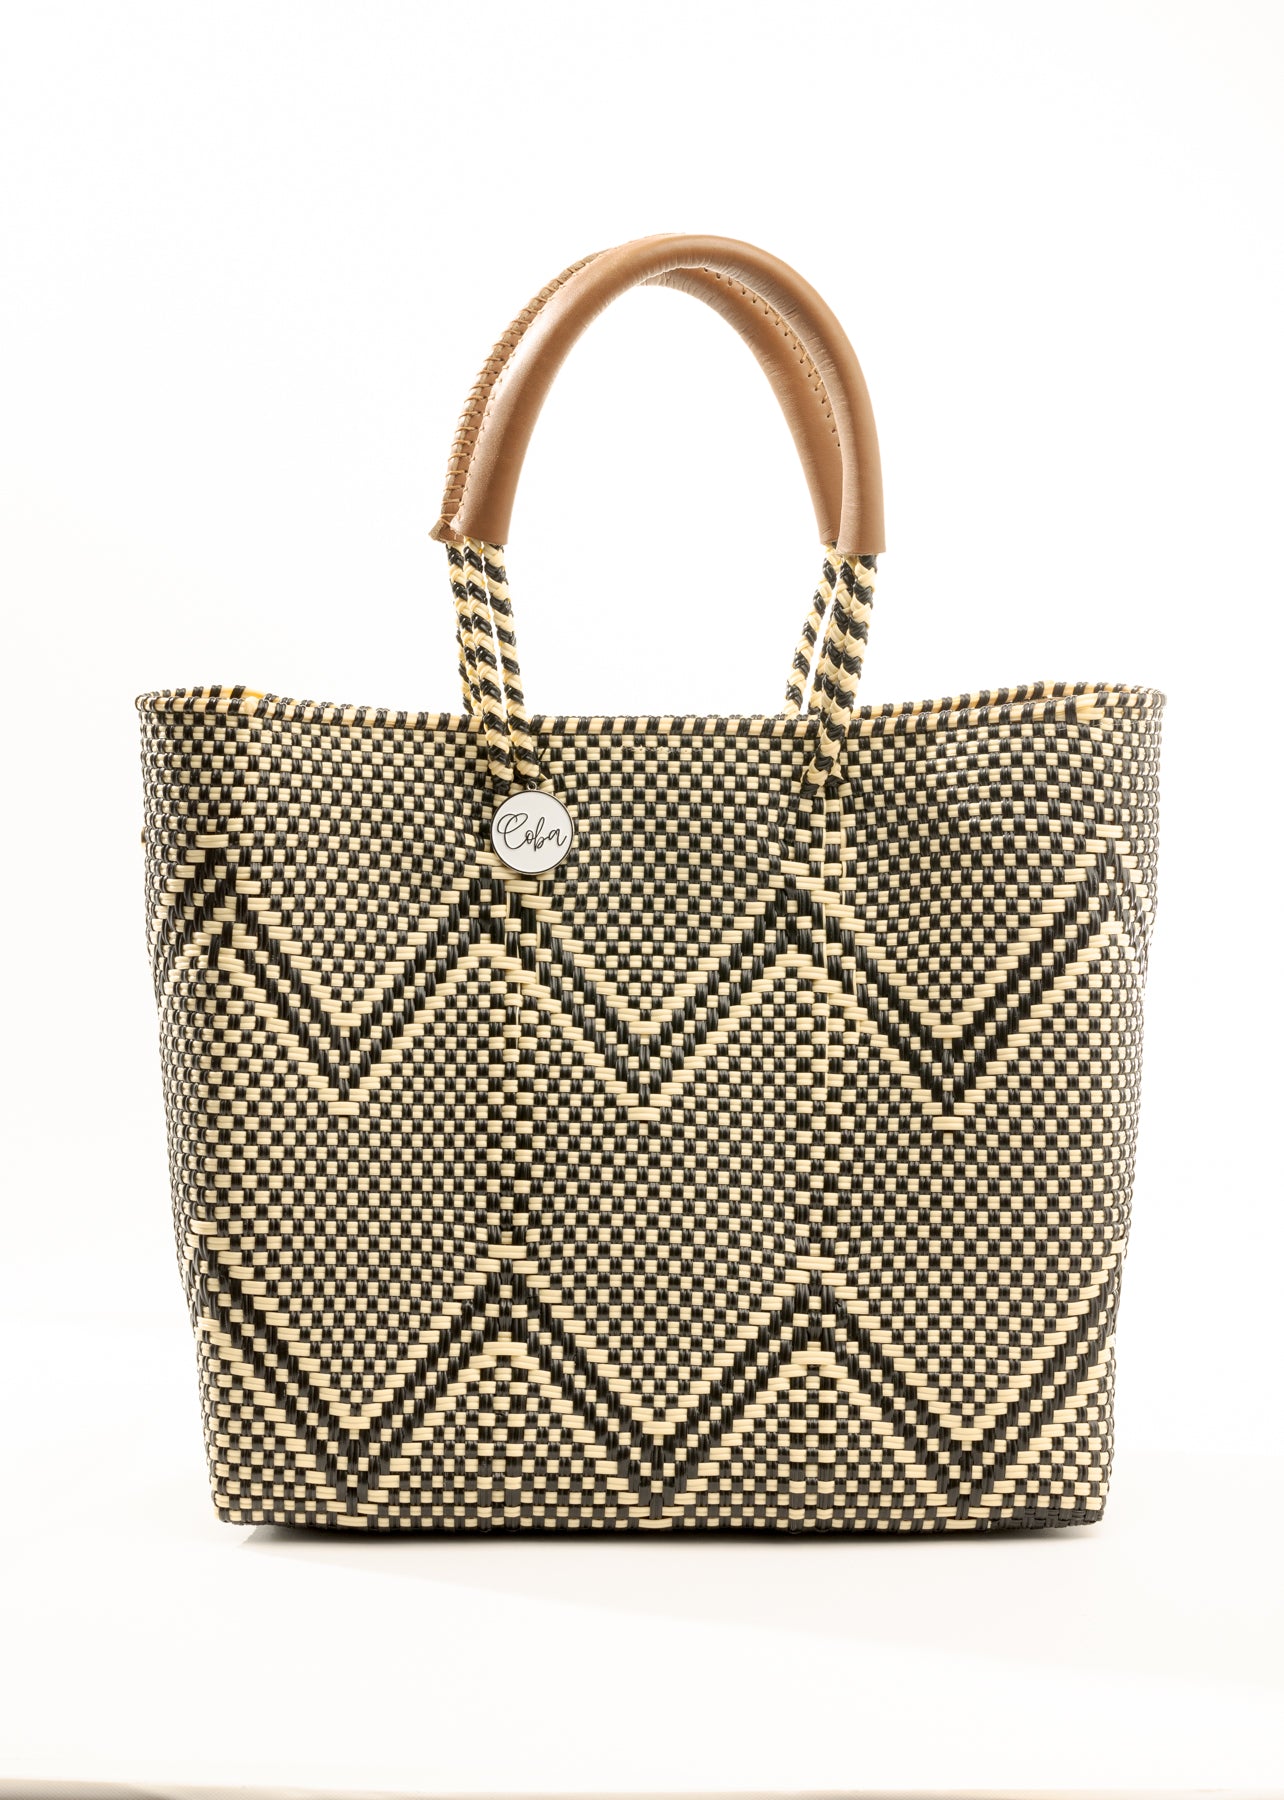 Brown, cream, and tan chevron pattern woven bucket tote made from recycled plastics and featuring tan leather handles and silver Coba logo medallion